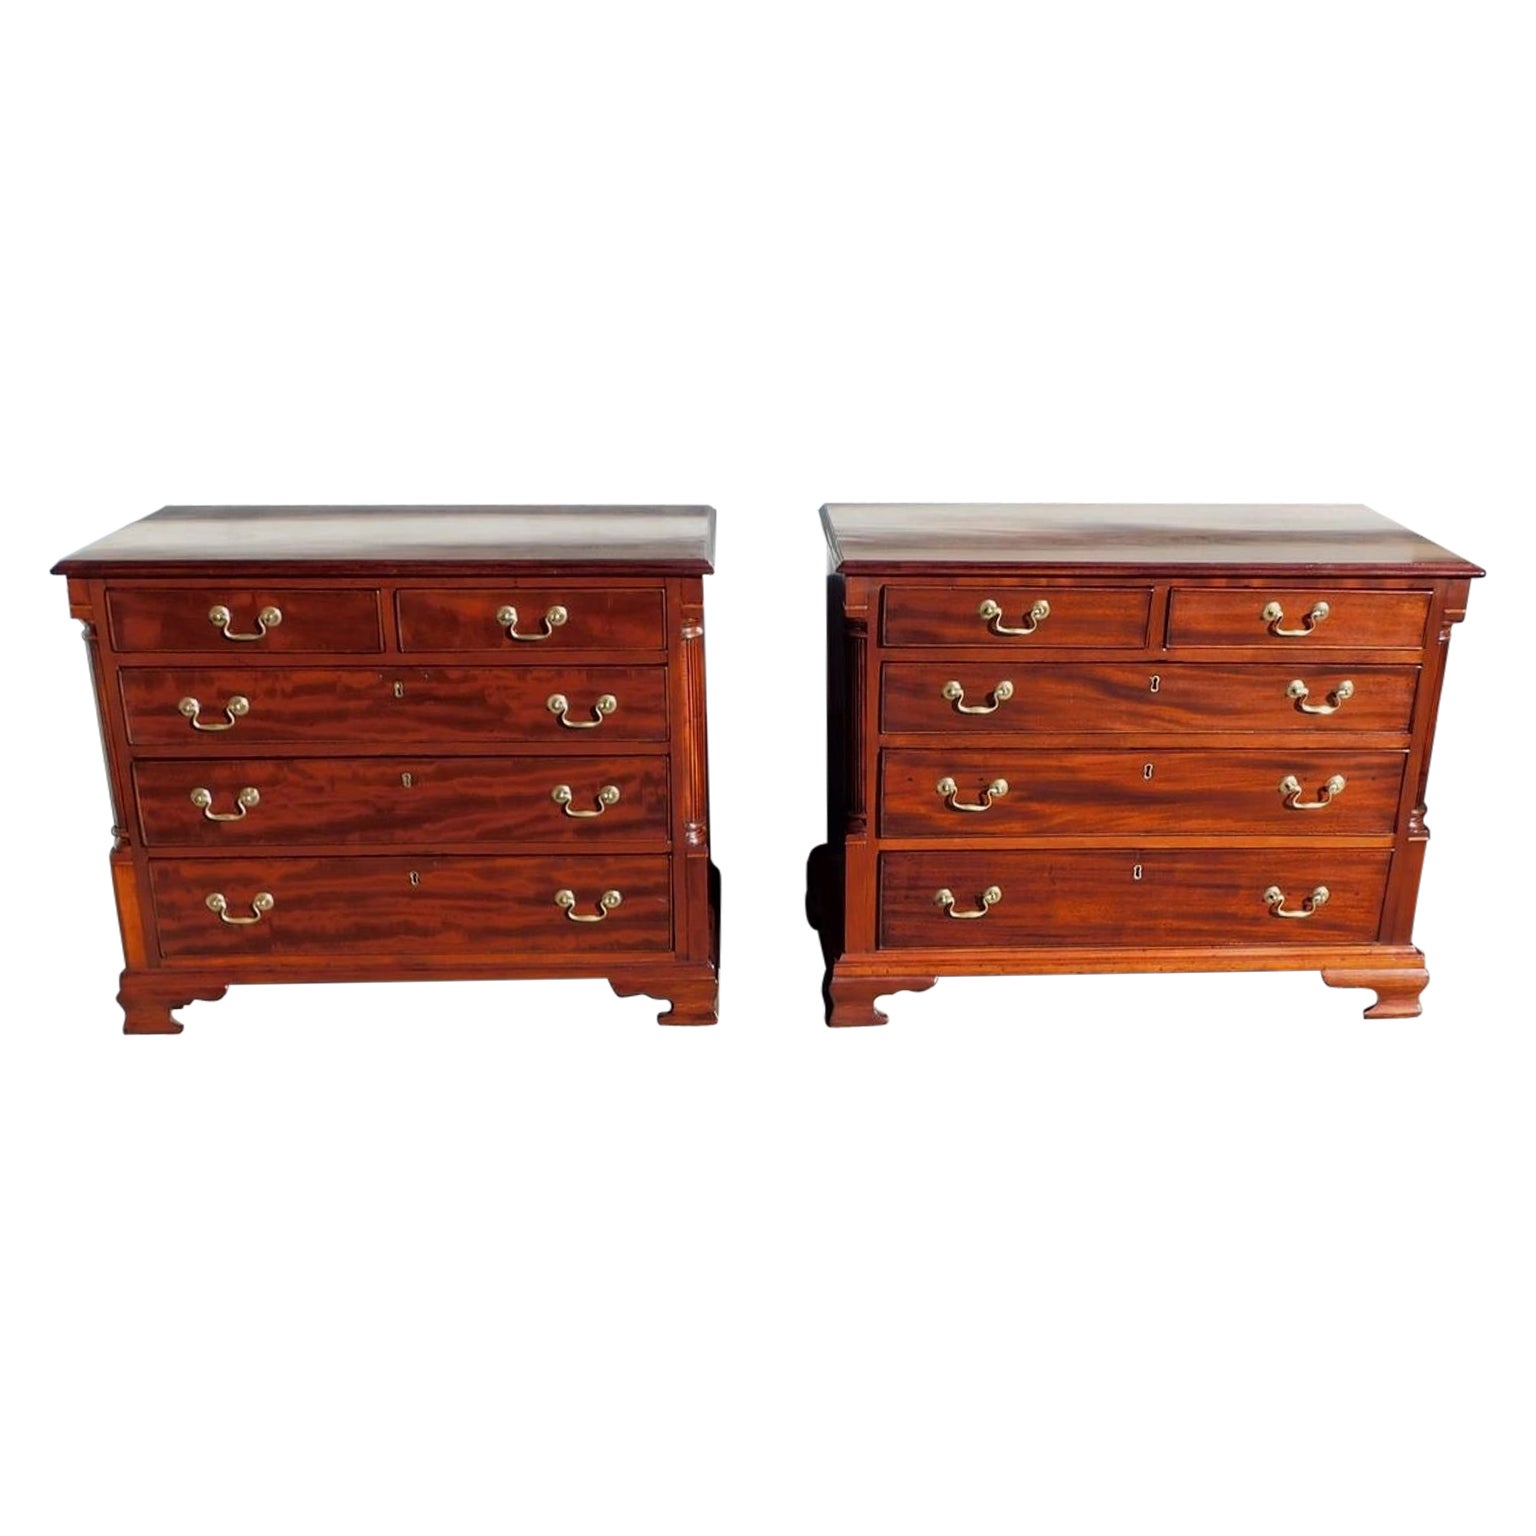 Pair of English Chippendale Mahogany Graduated Chest of Drawers, Circa 1780